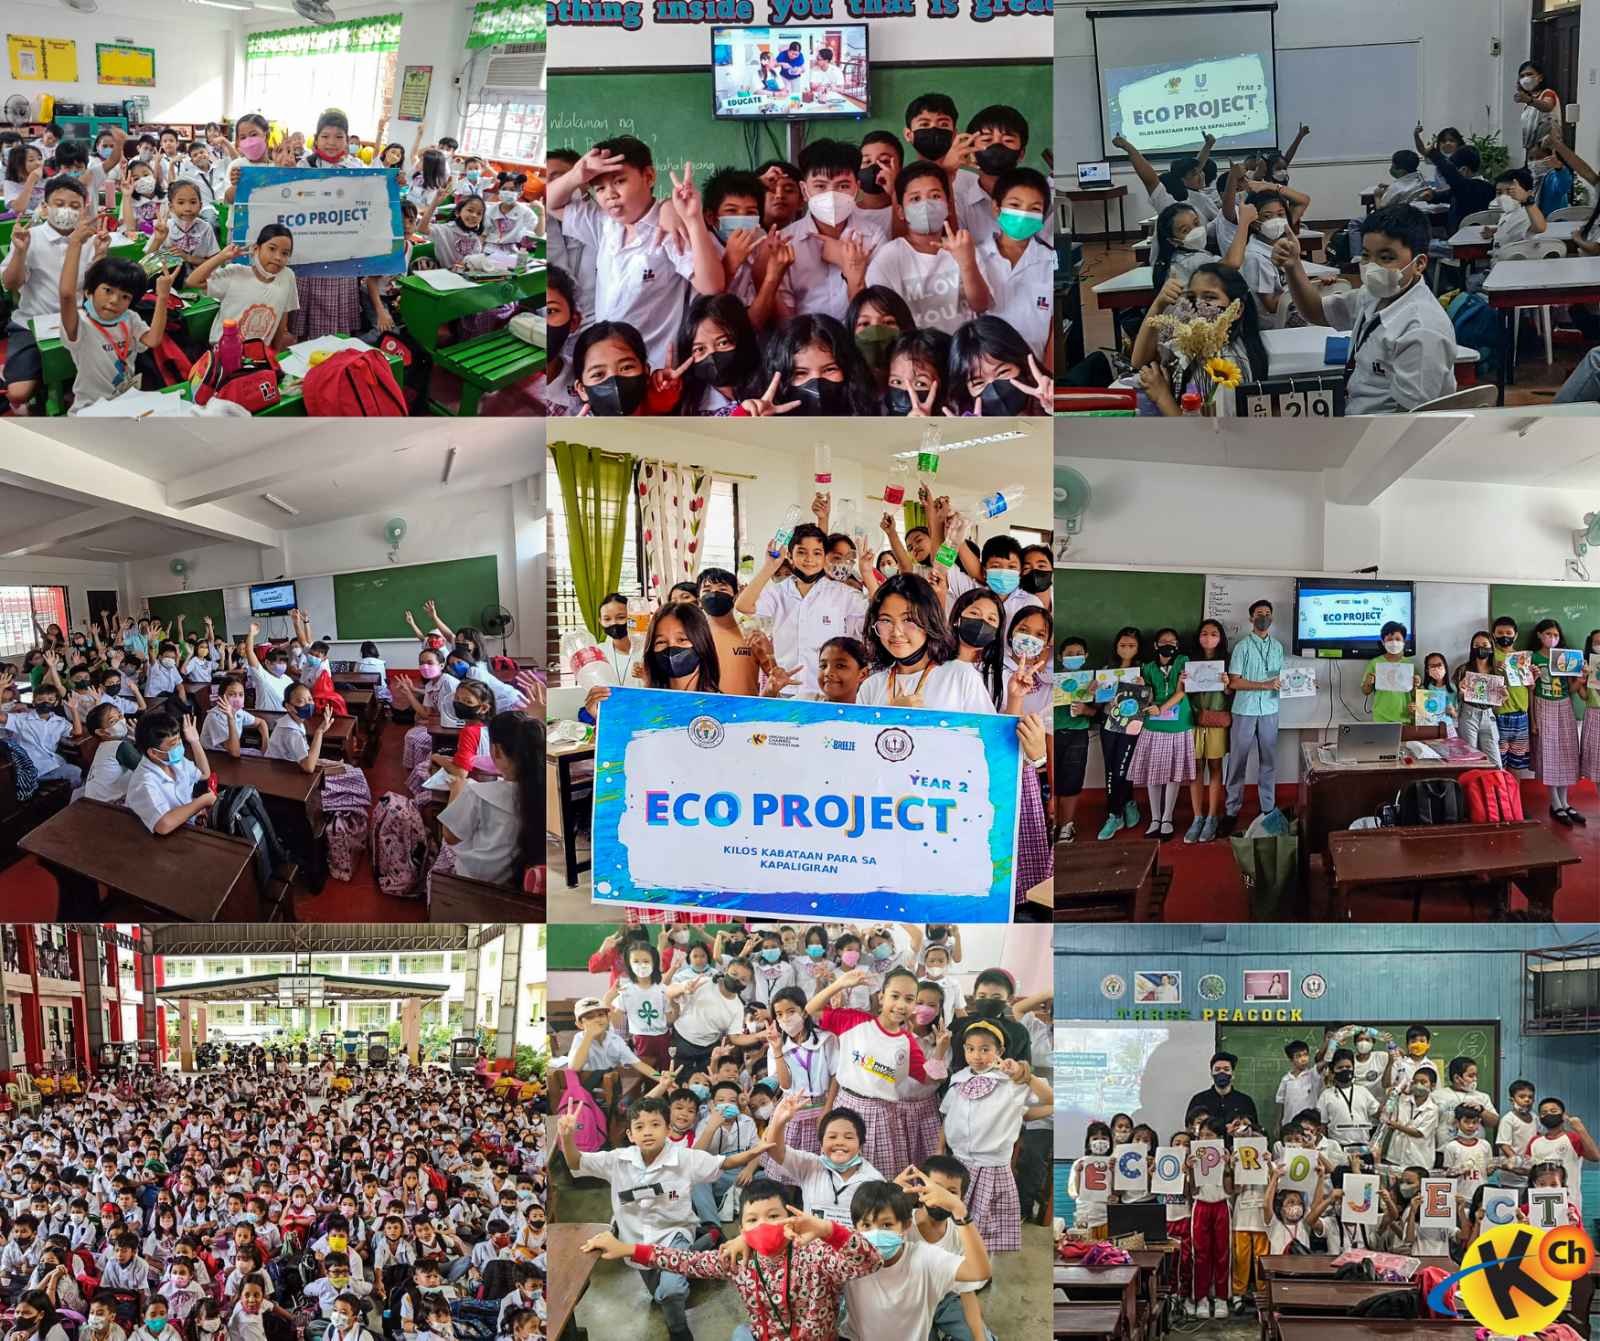 Knowledge Channel rallies the youth to take part in environmental protection with ‘EcoProject School Tour Year 2’